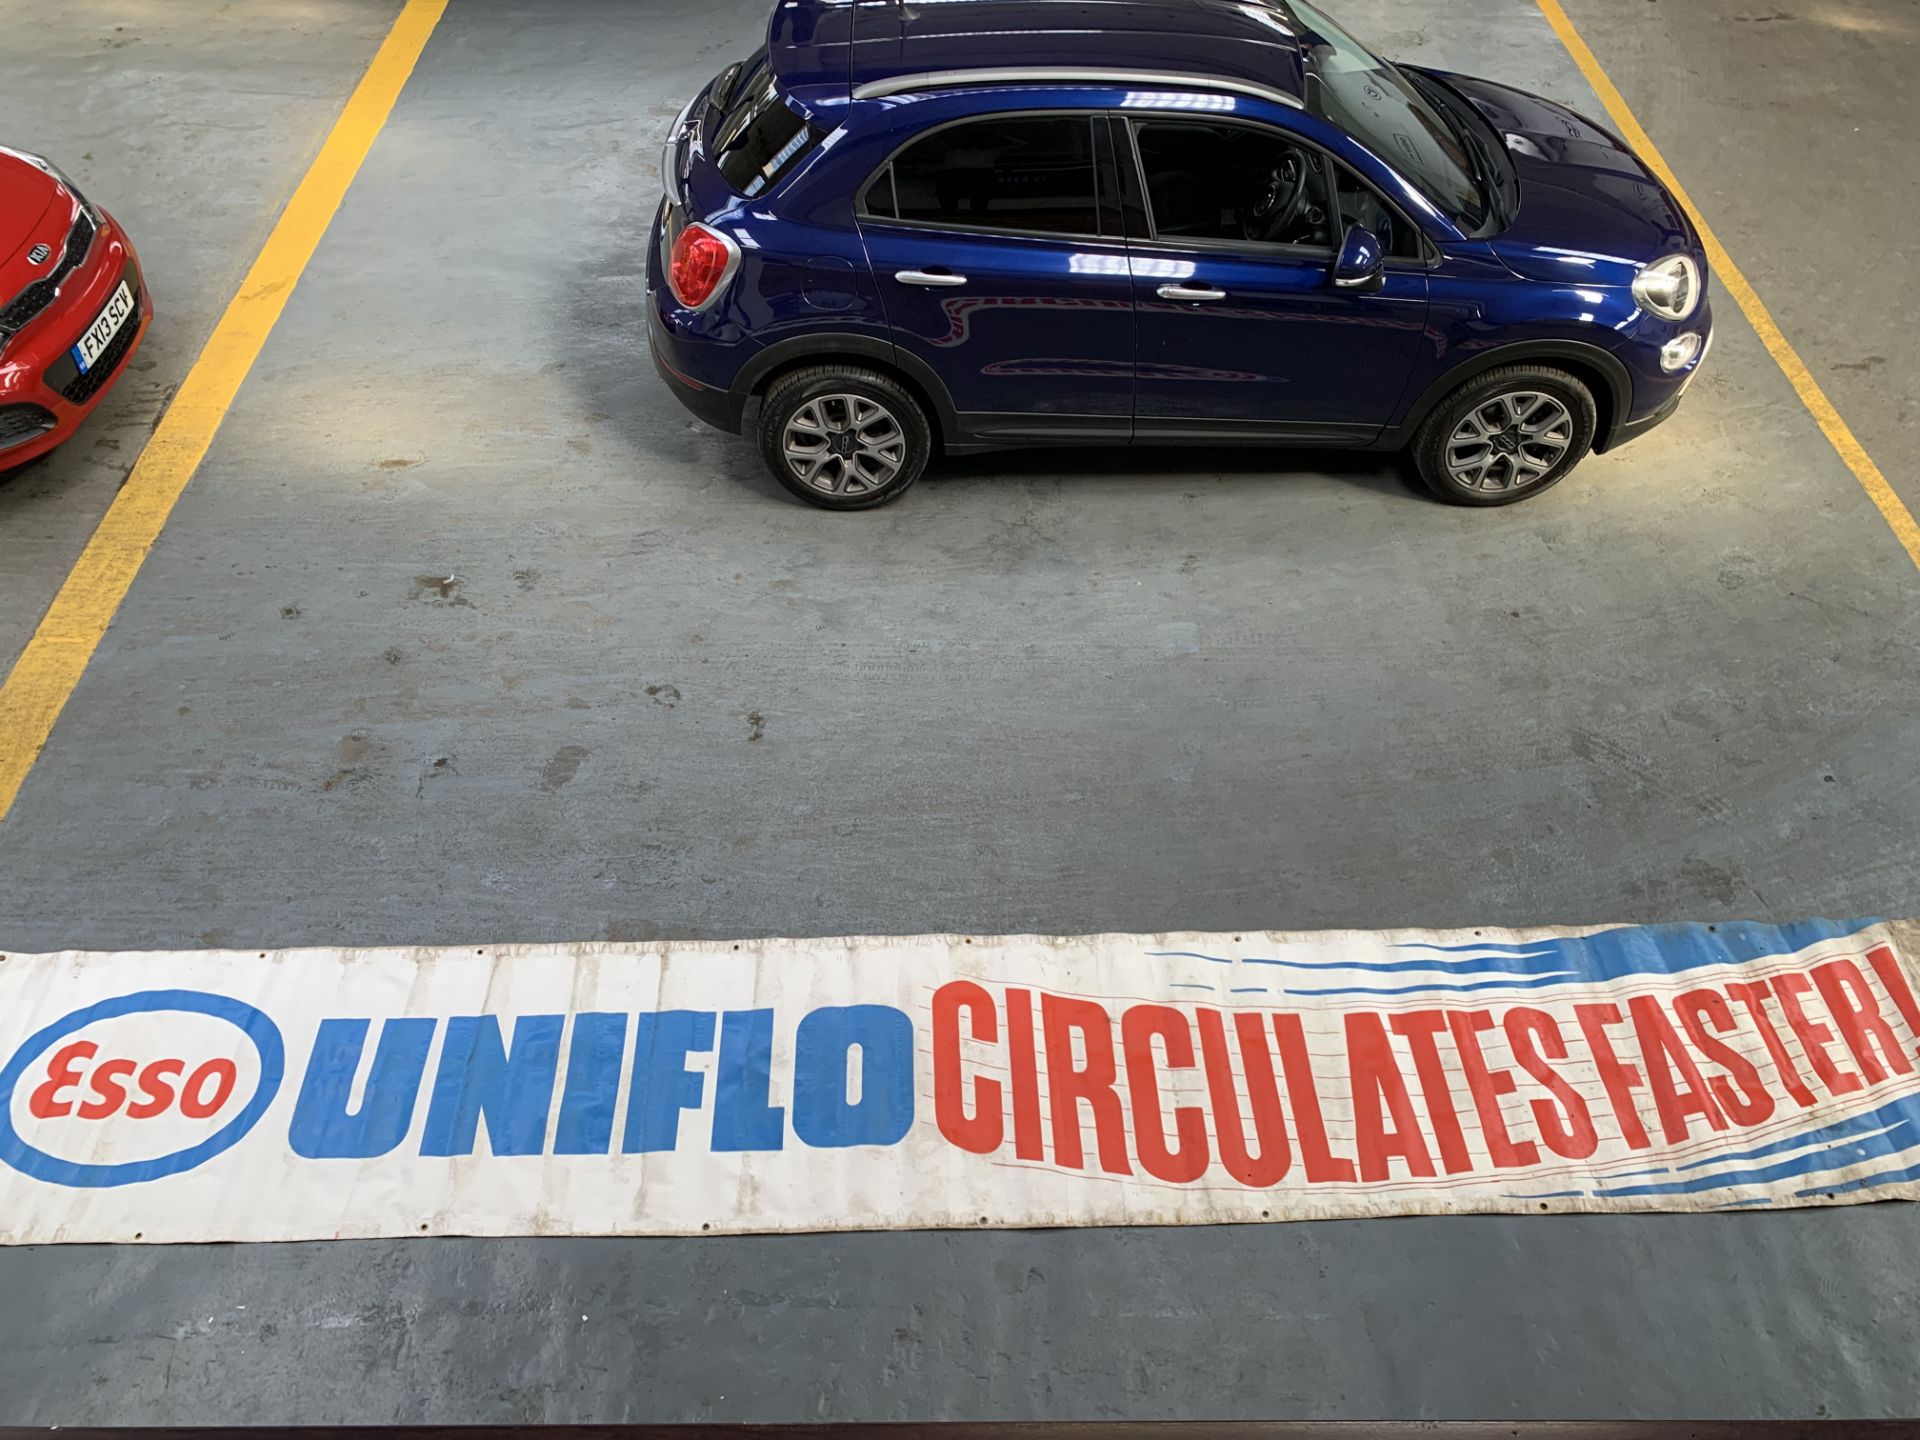 Large Esso Uniflo Circulates Faster" Banner"